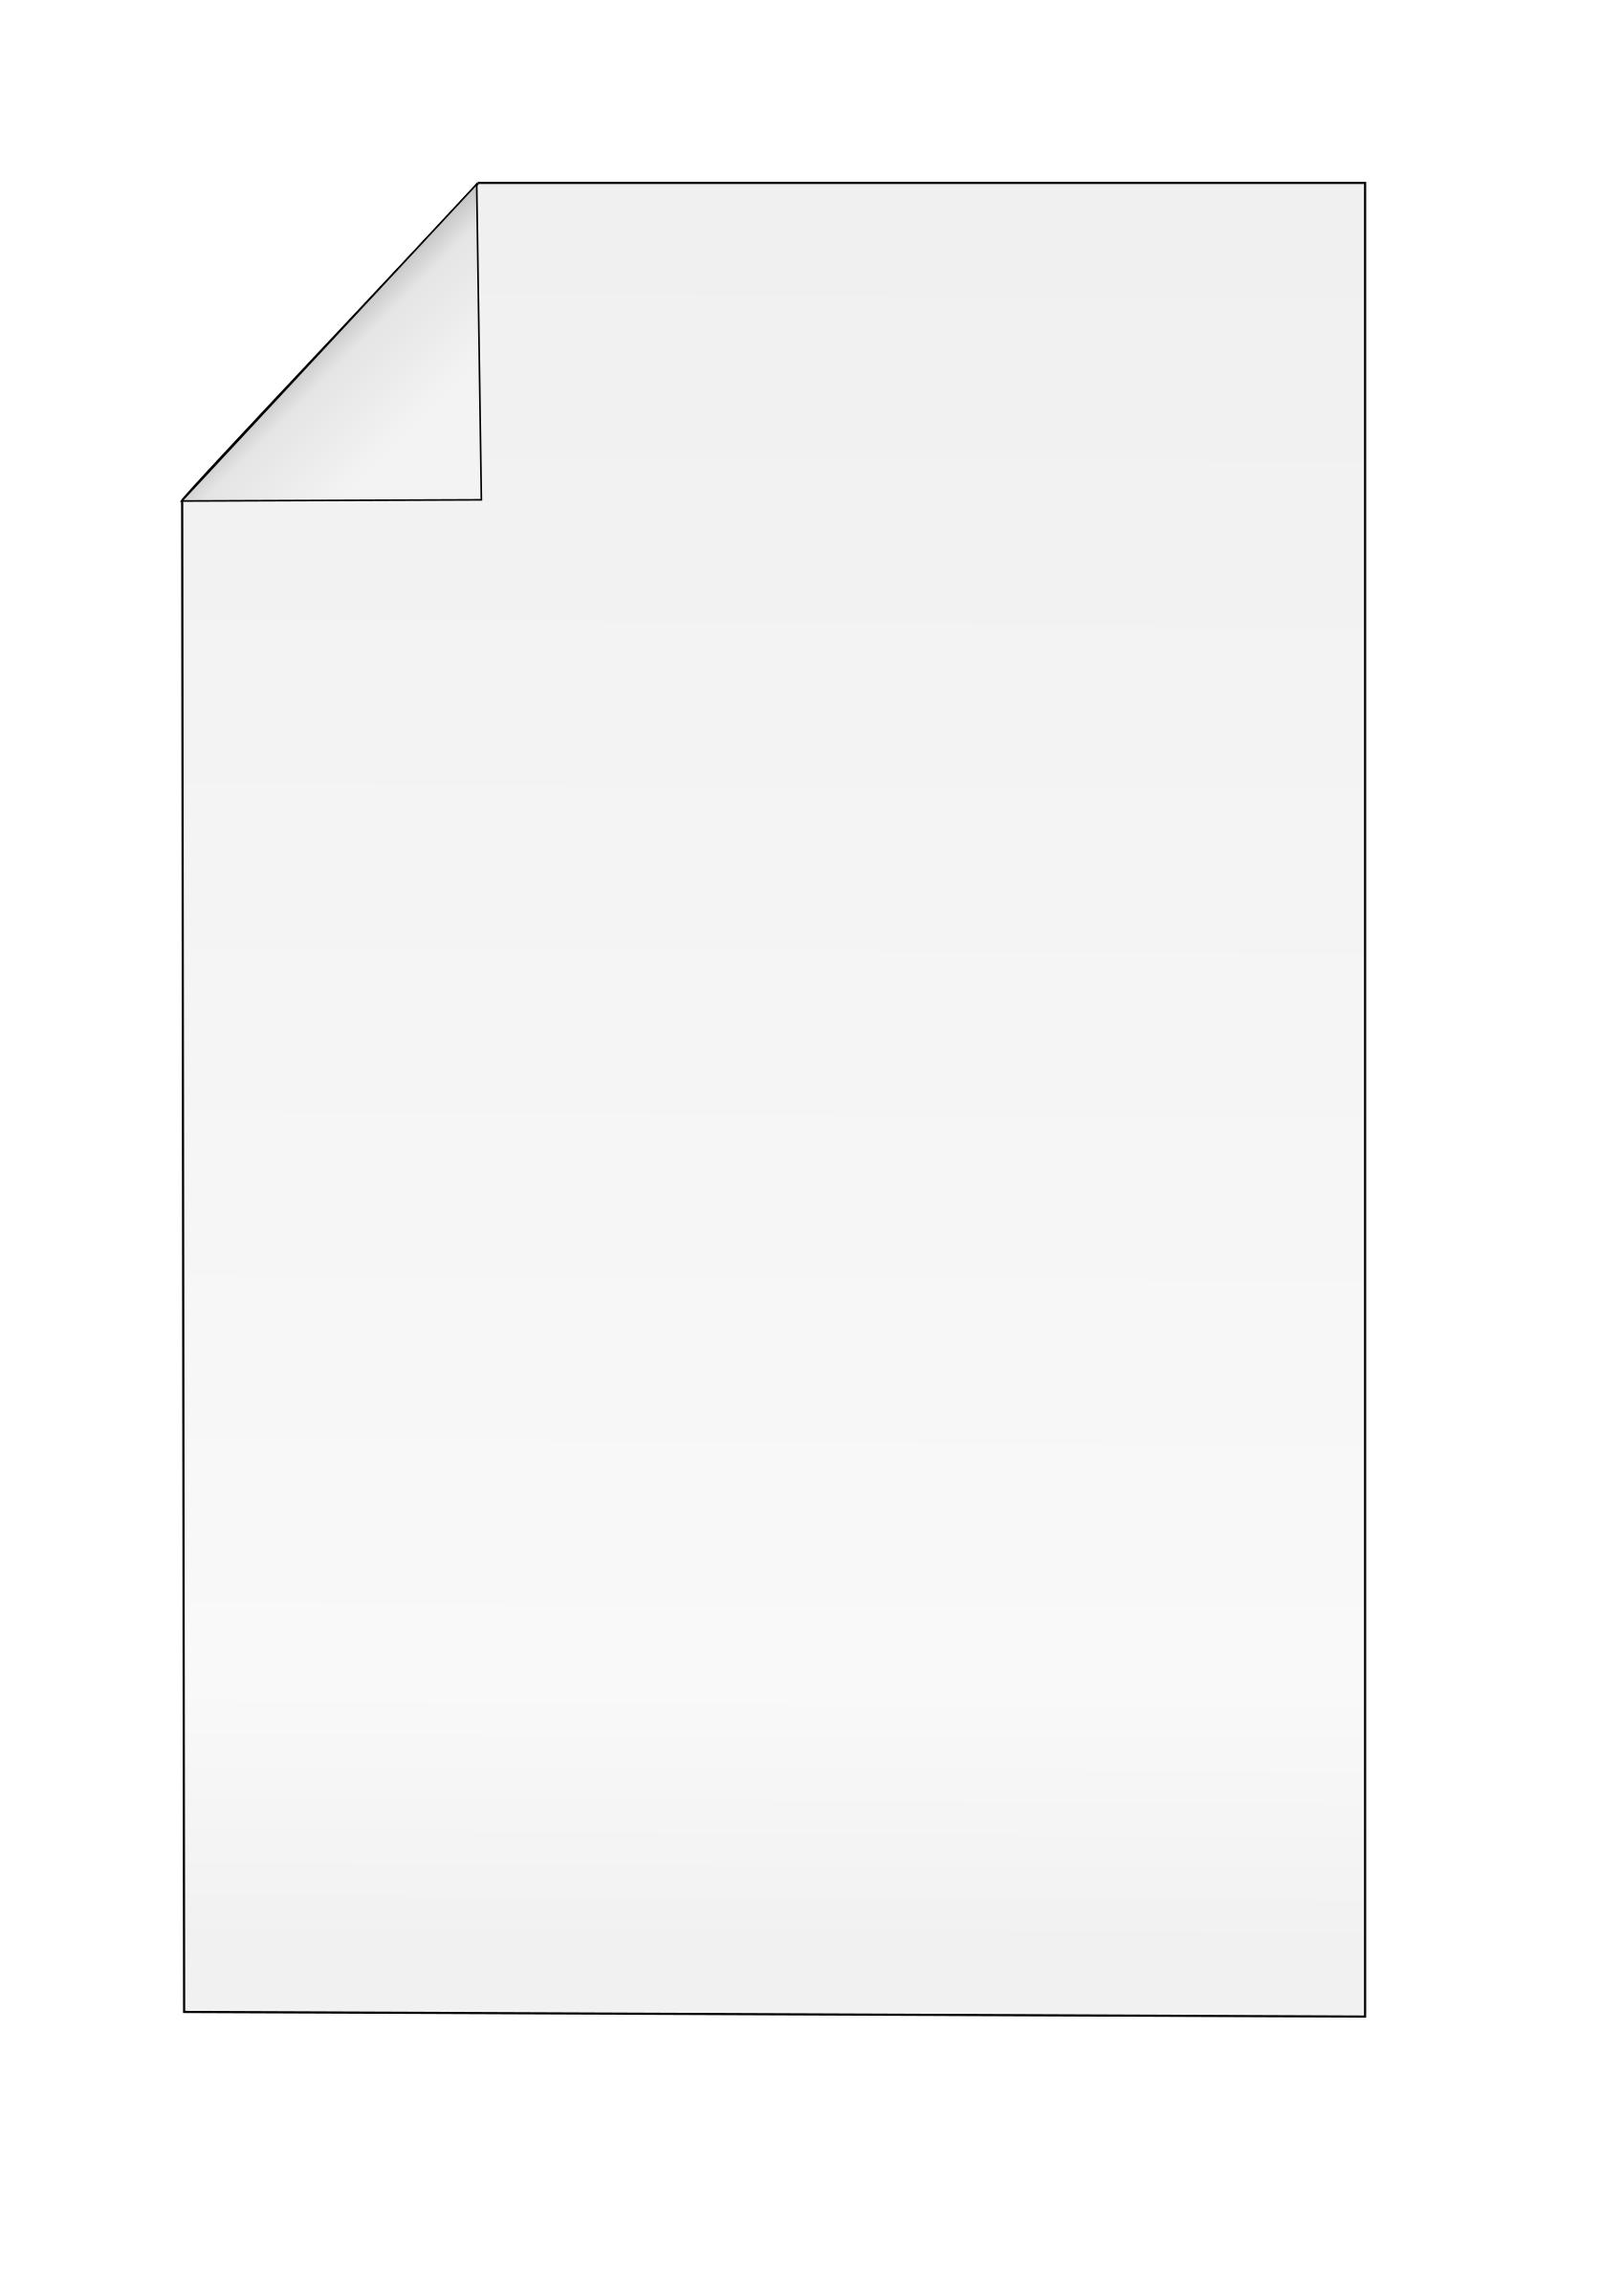 Papersheet PNG icons